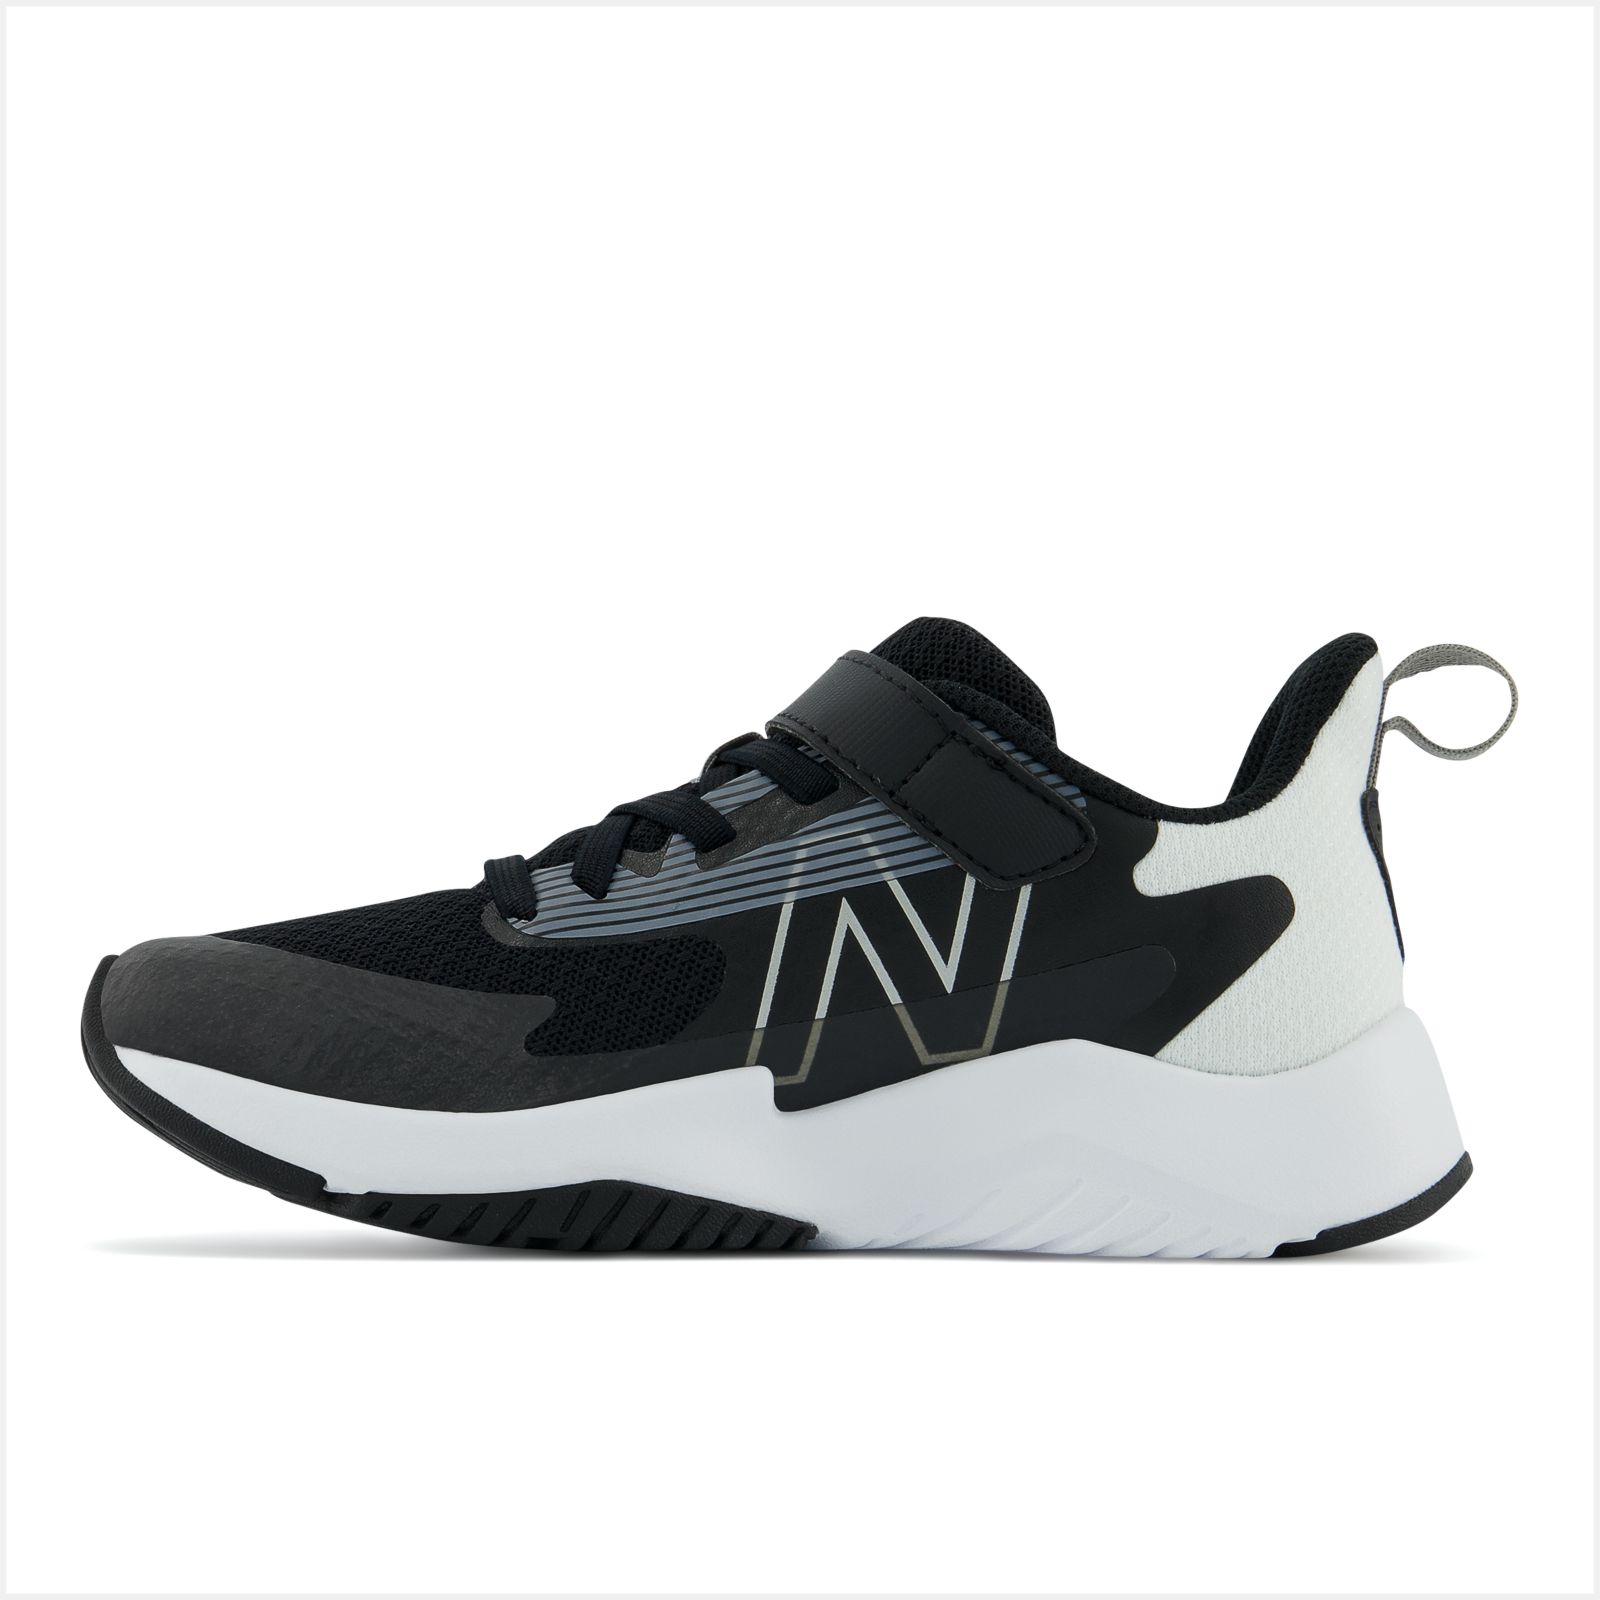 Rave Run v2 Bungee Lace with Top Strap - New Balance